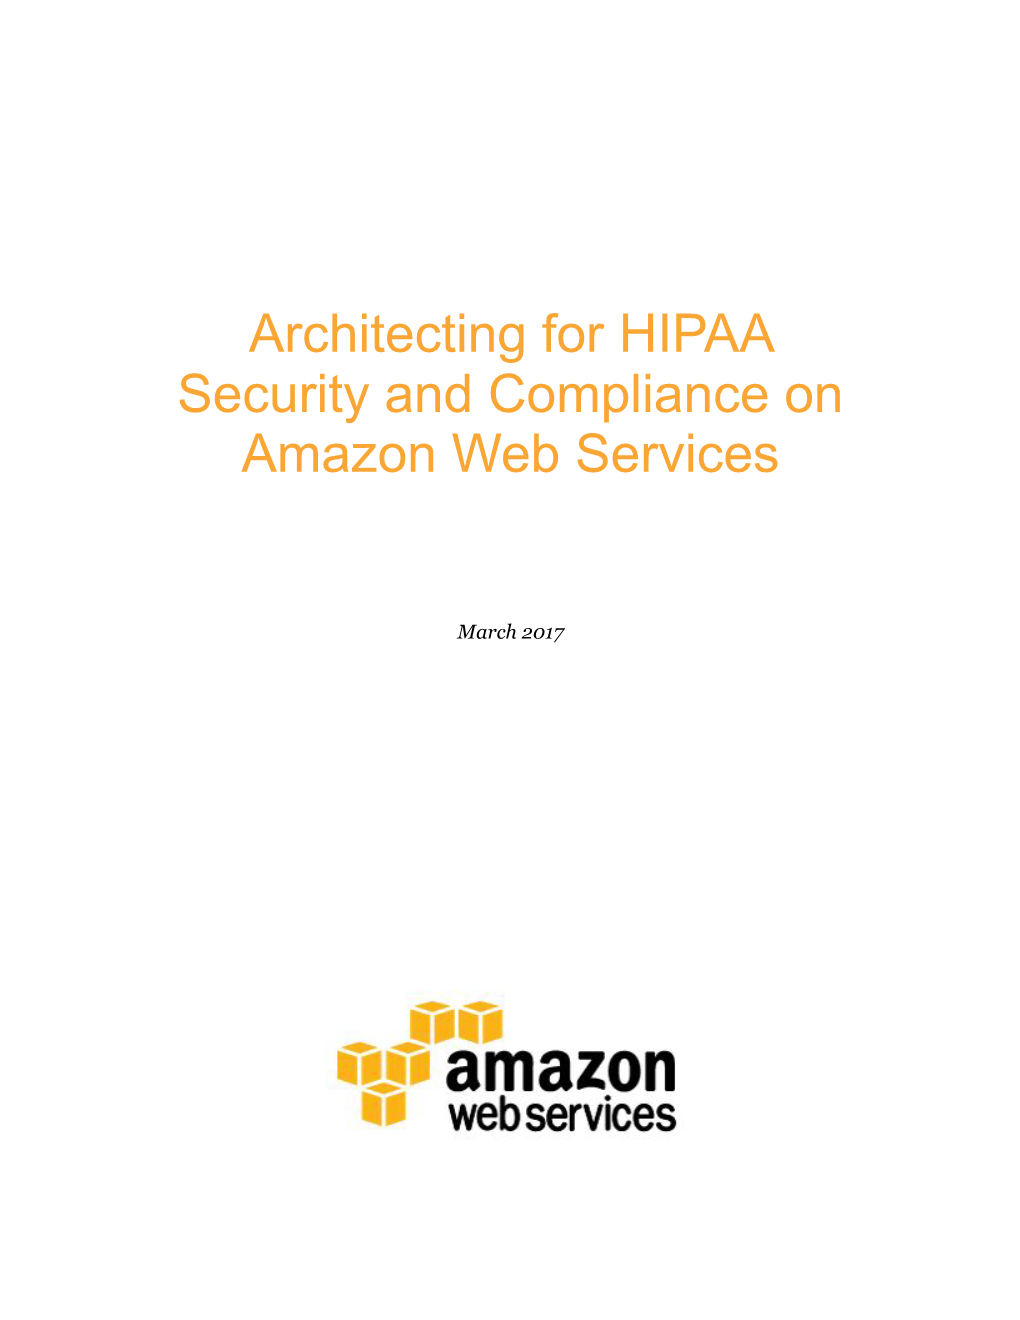 Architecting for HIPAA Security and Compliance on Amazon Web Services